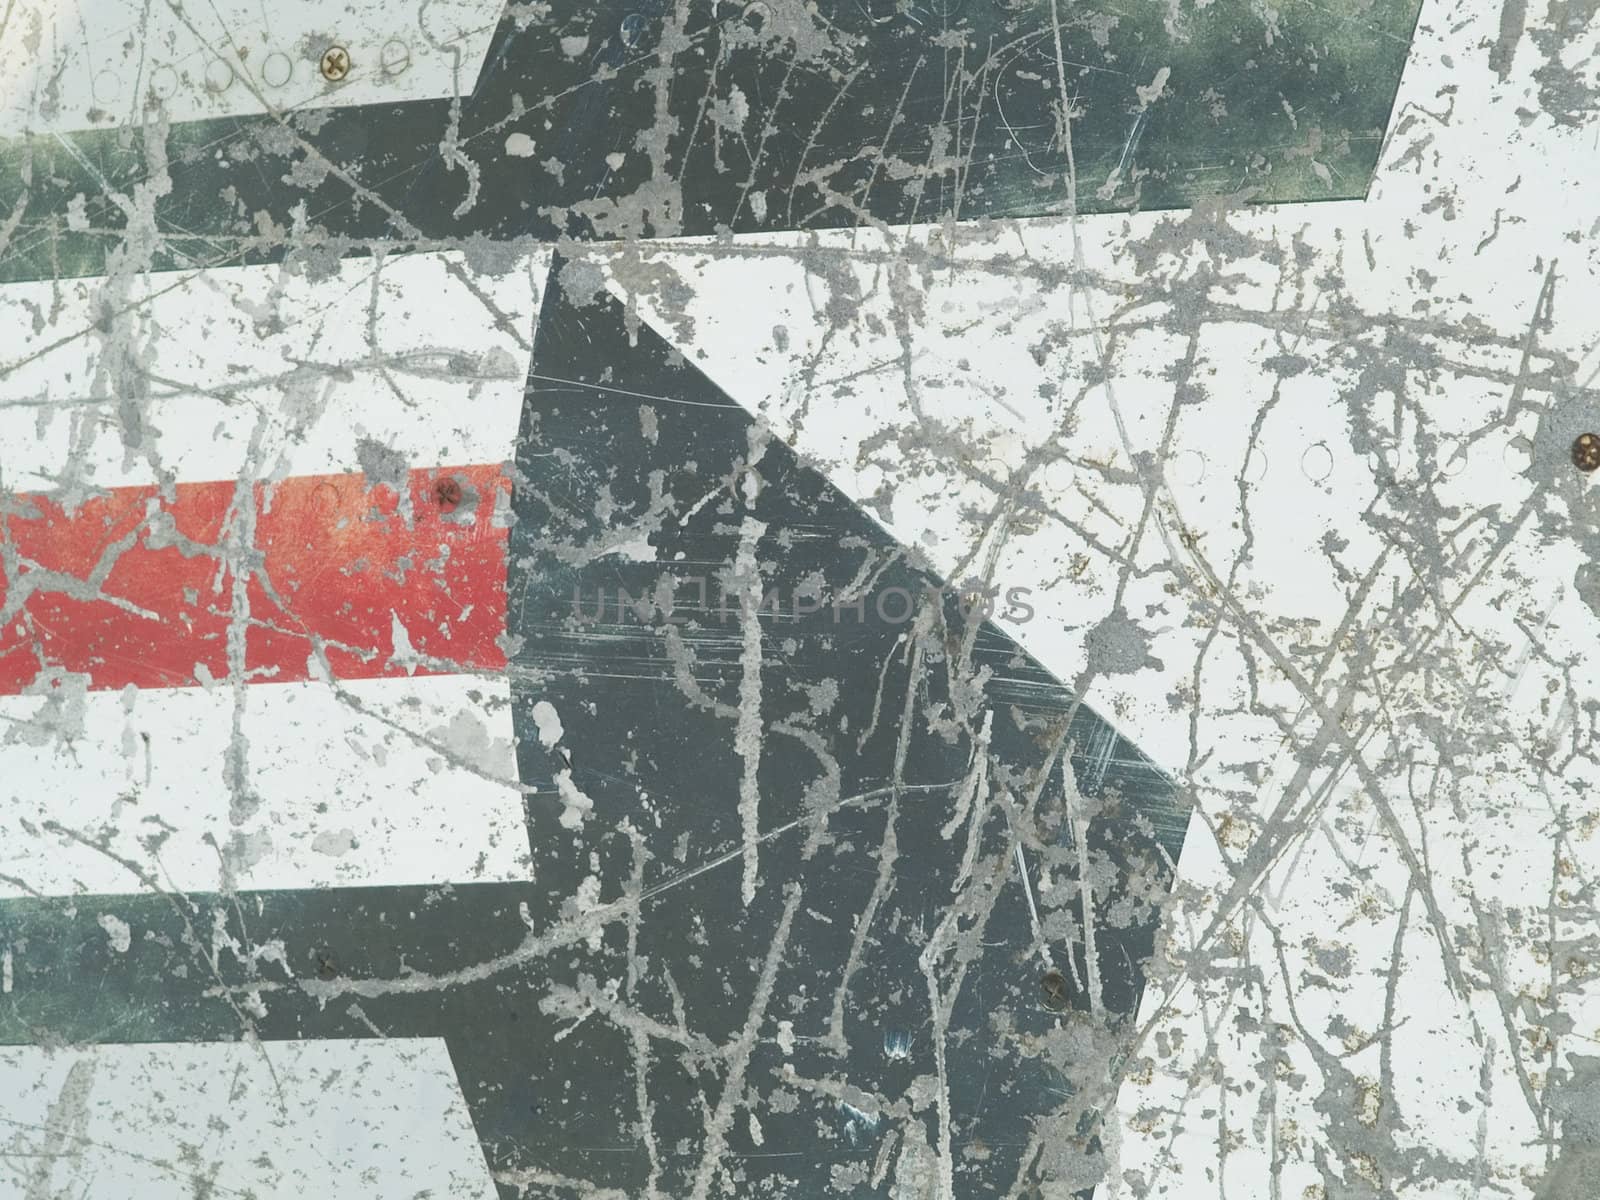 Worn out emblem of the American Air Force on a crashed military airplane